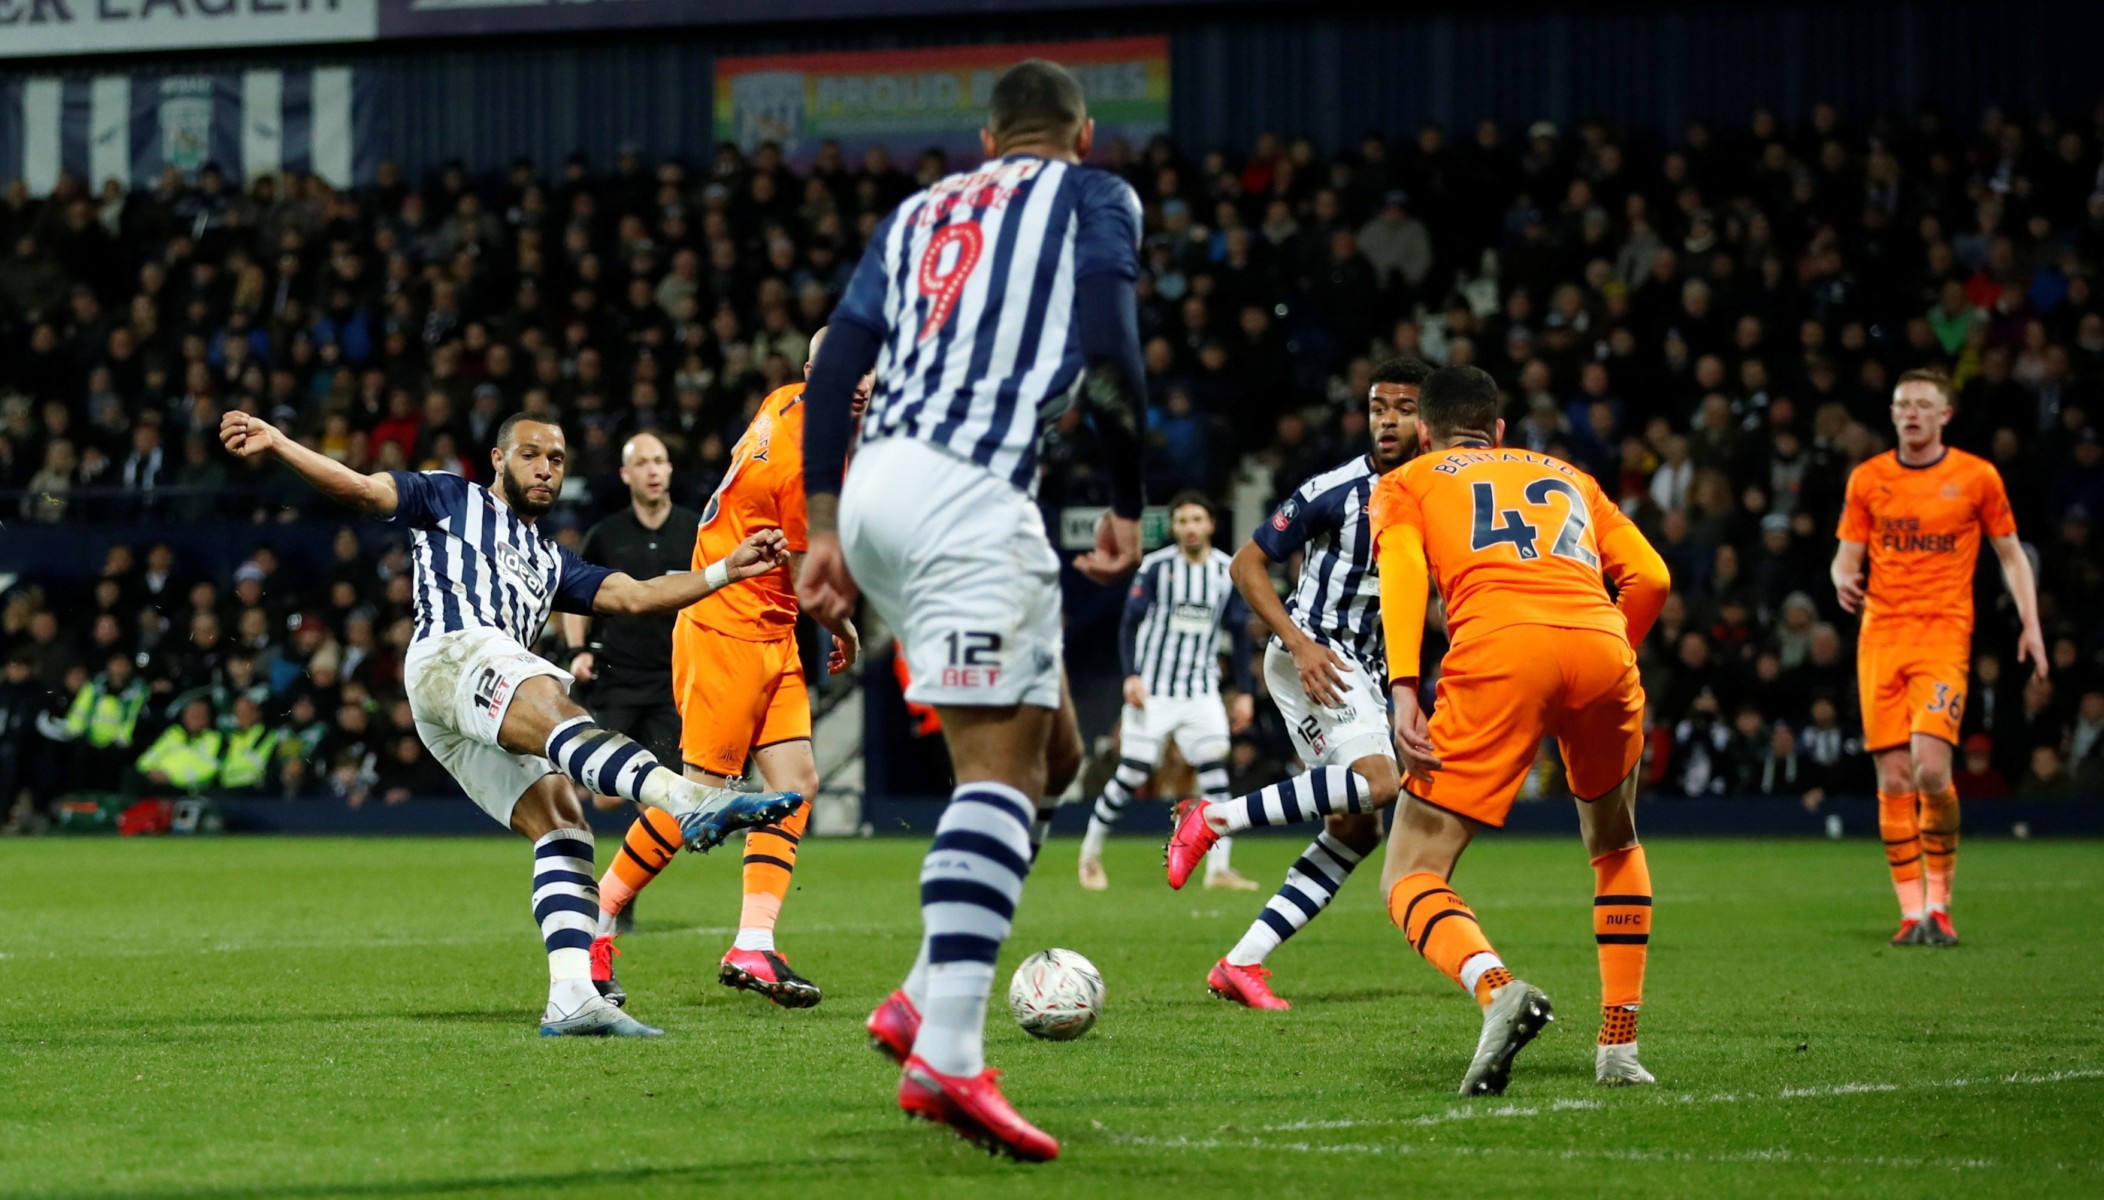 Matt Phillips sparked WBA into life with this strike on 74 minutes